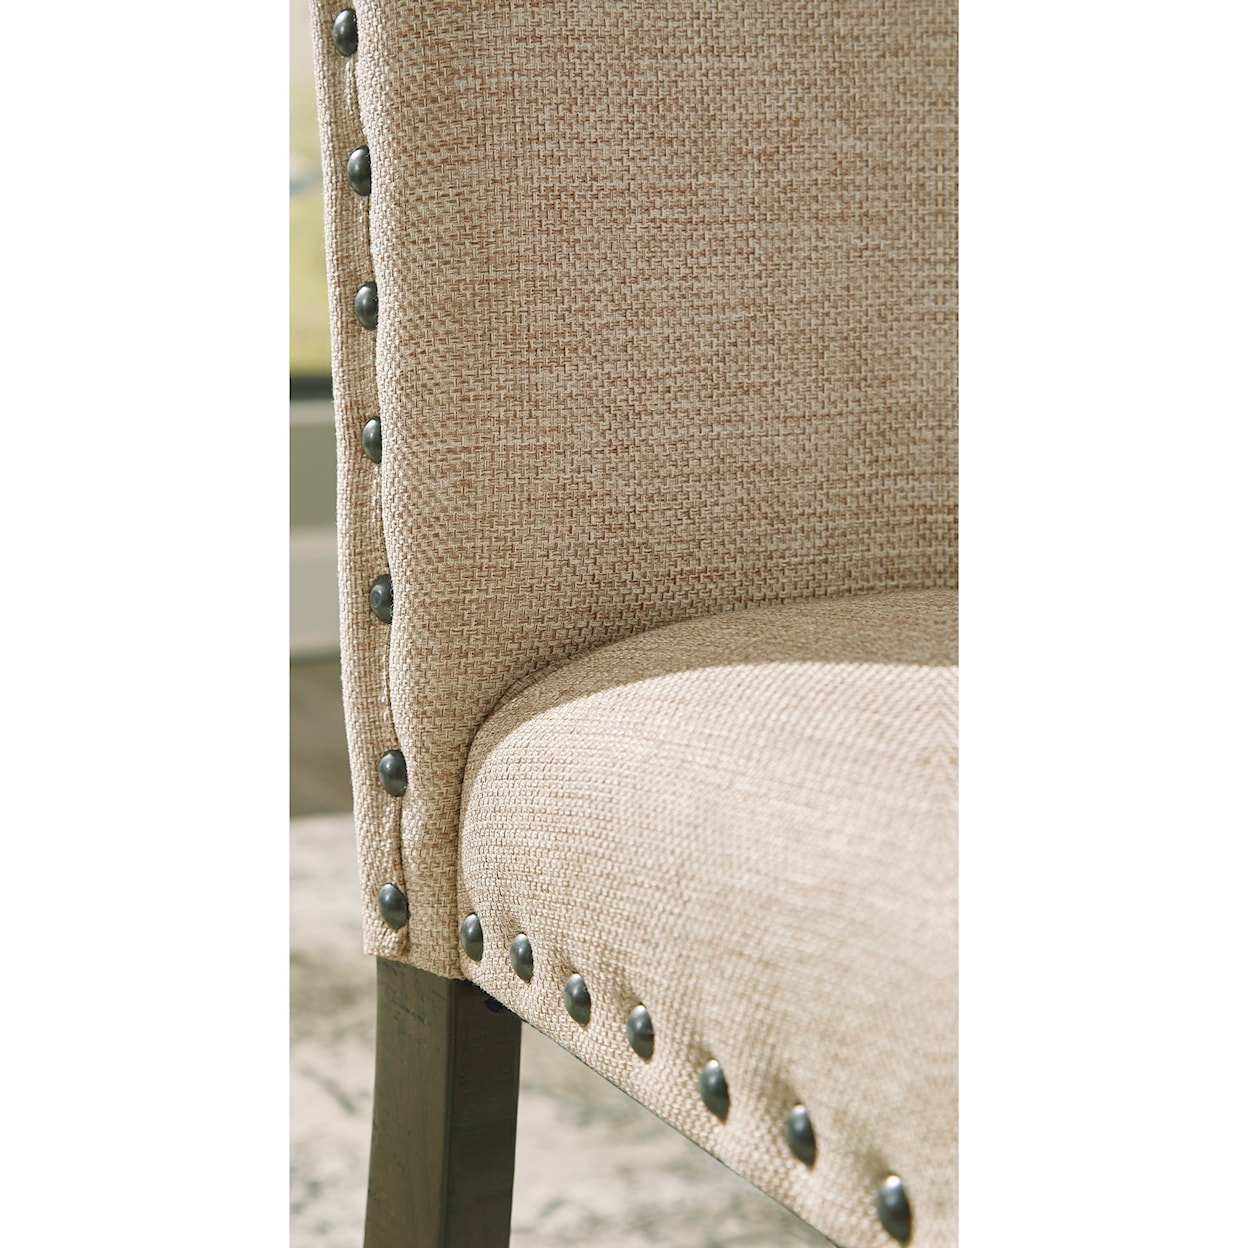 Ashley Furniture Signature Design Rokane Upholstered Dining Side Chairs